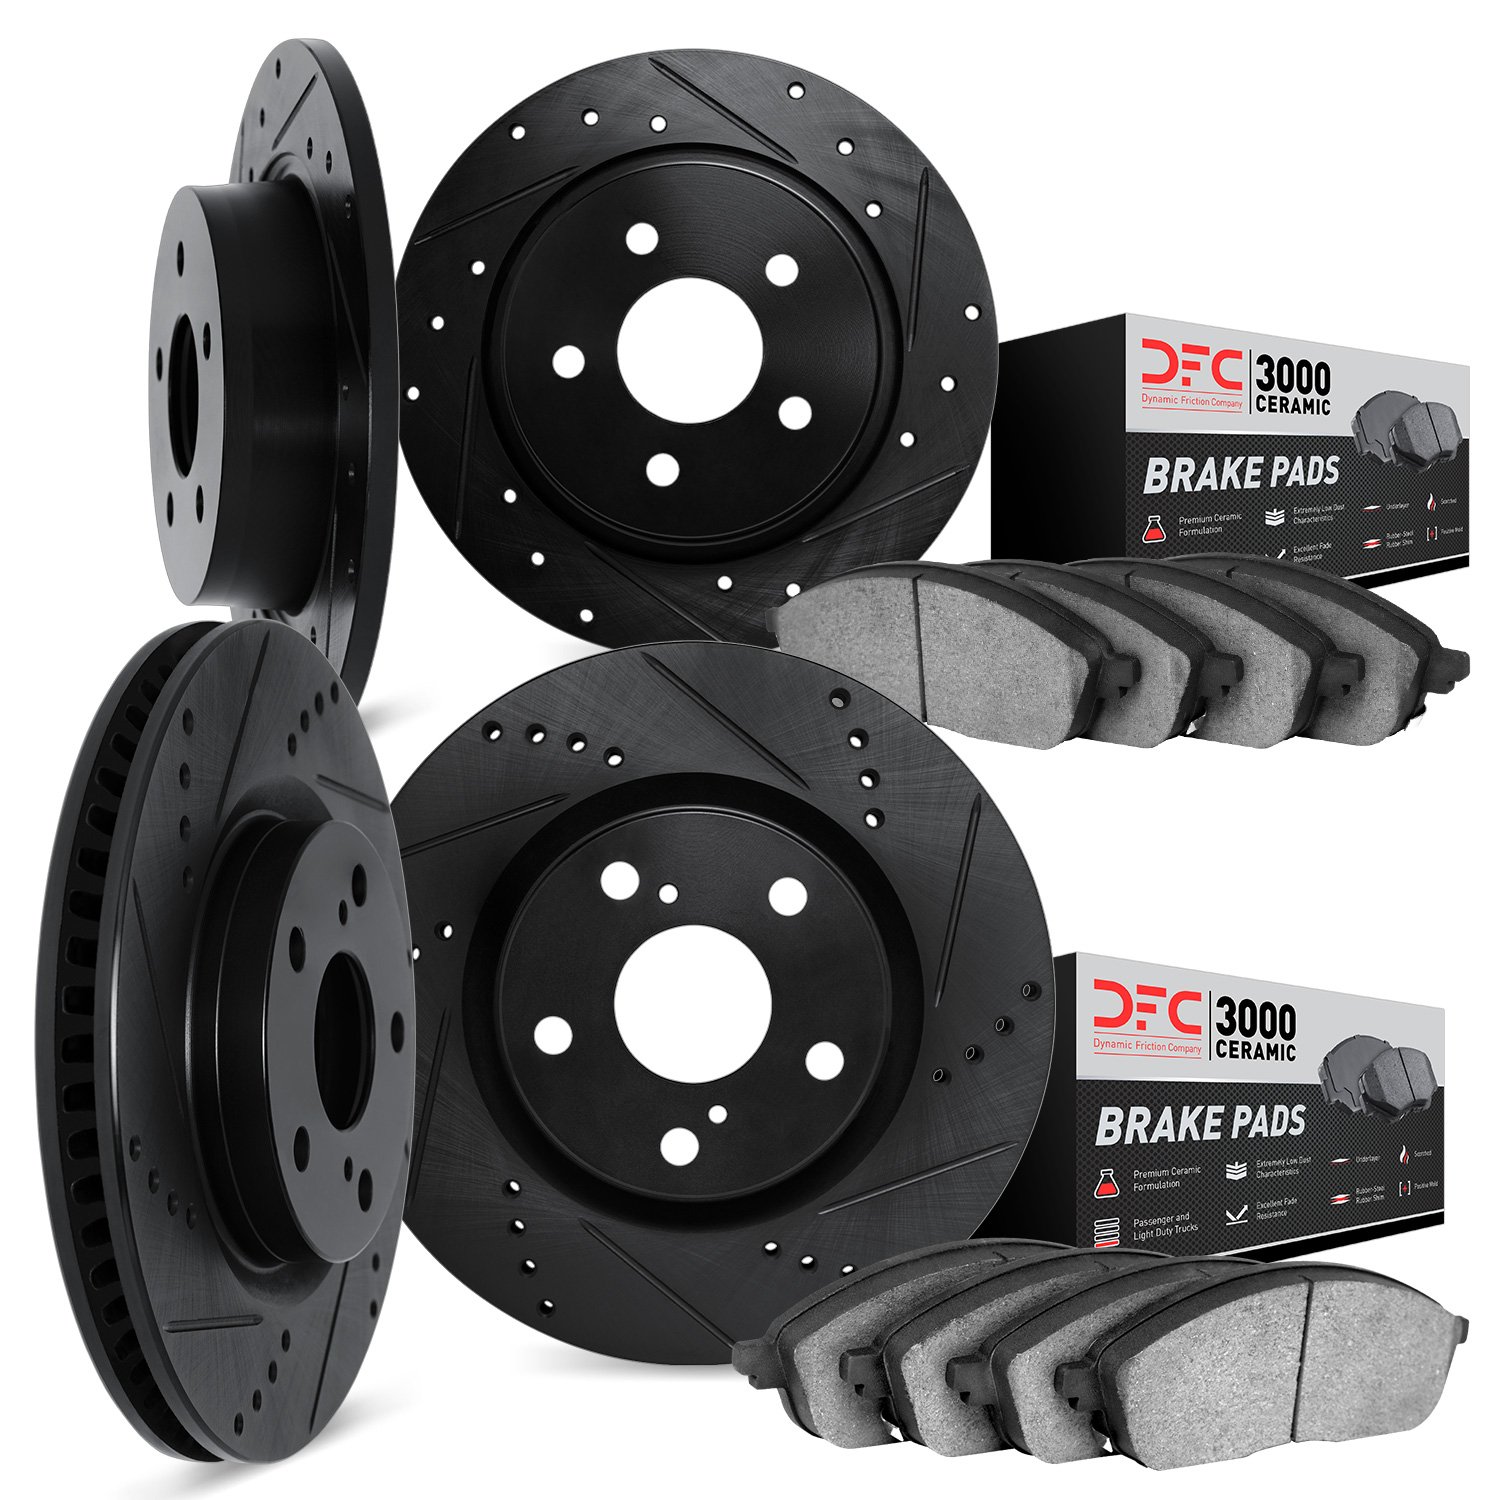 8304-59049 Drilled/Slotted Brake Rotors with 3000-Series Ceramic Brake Pads Kit [Black], 2002-2006 Acura/Honda, Position: Front